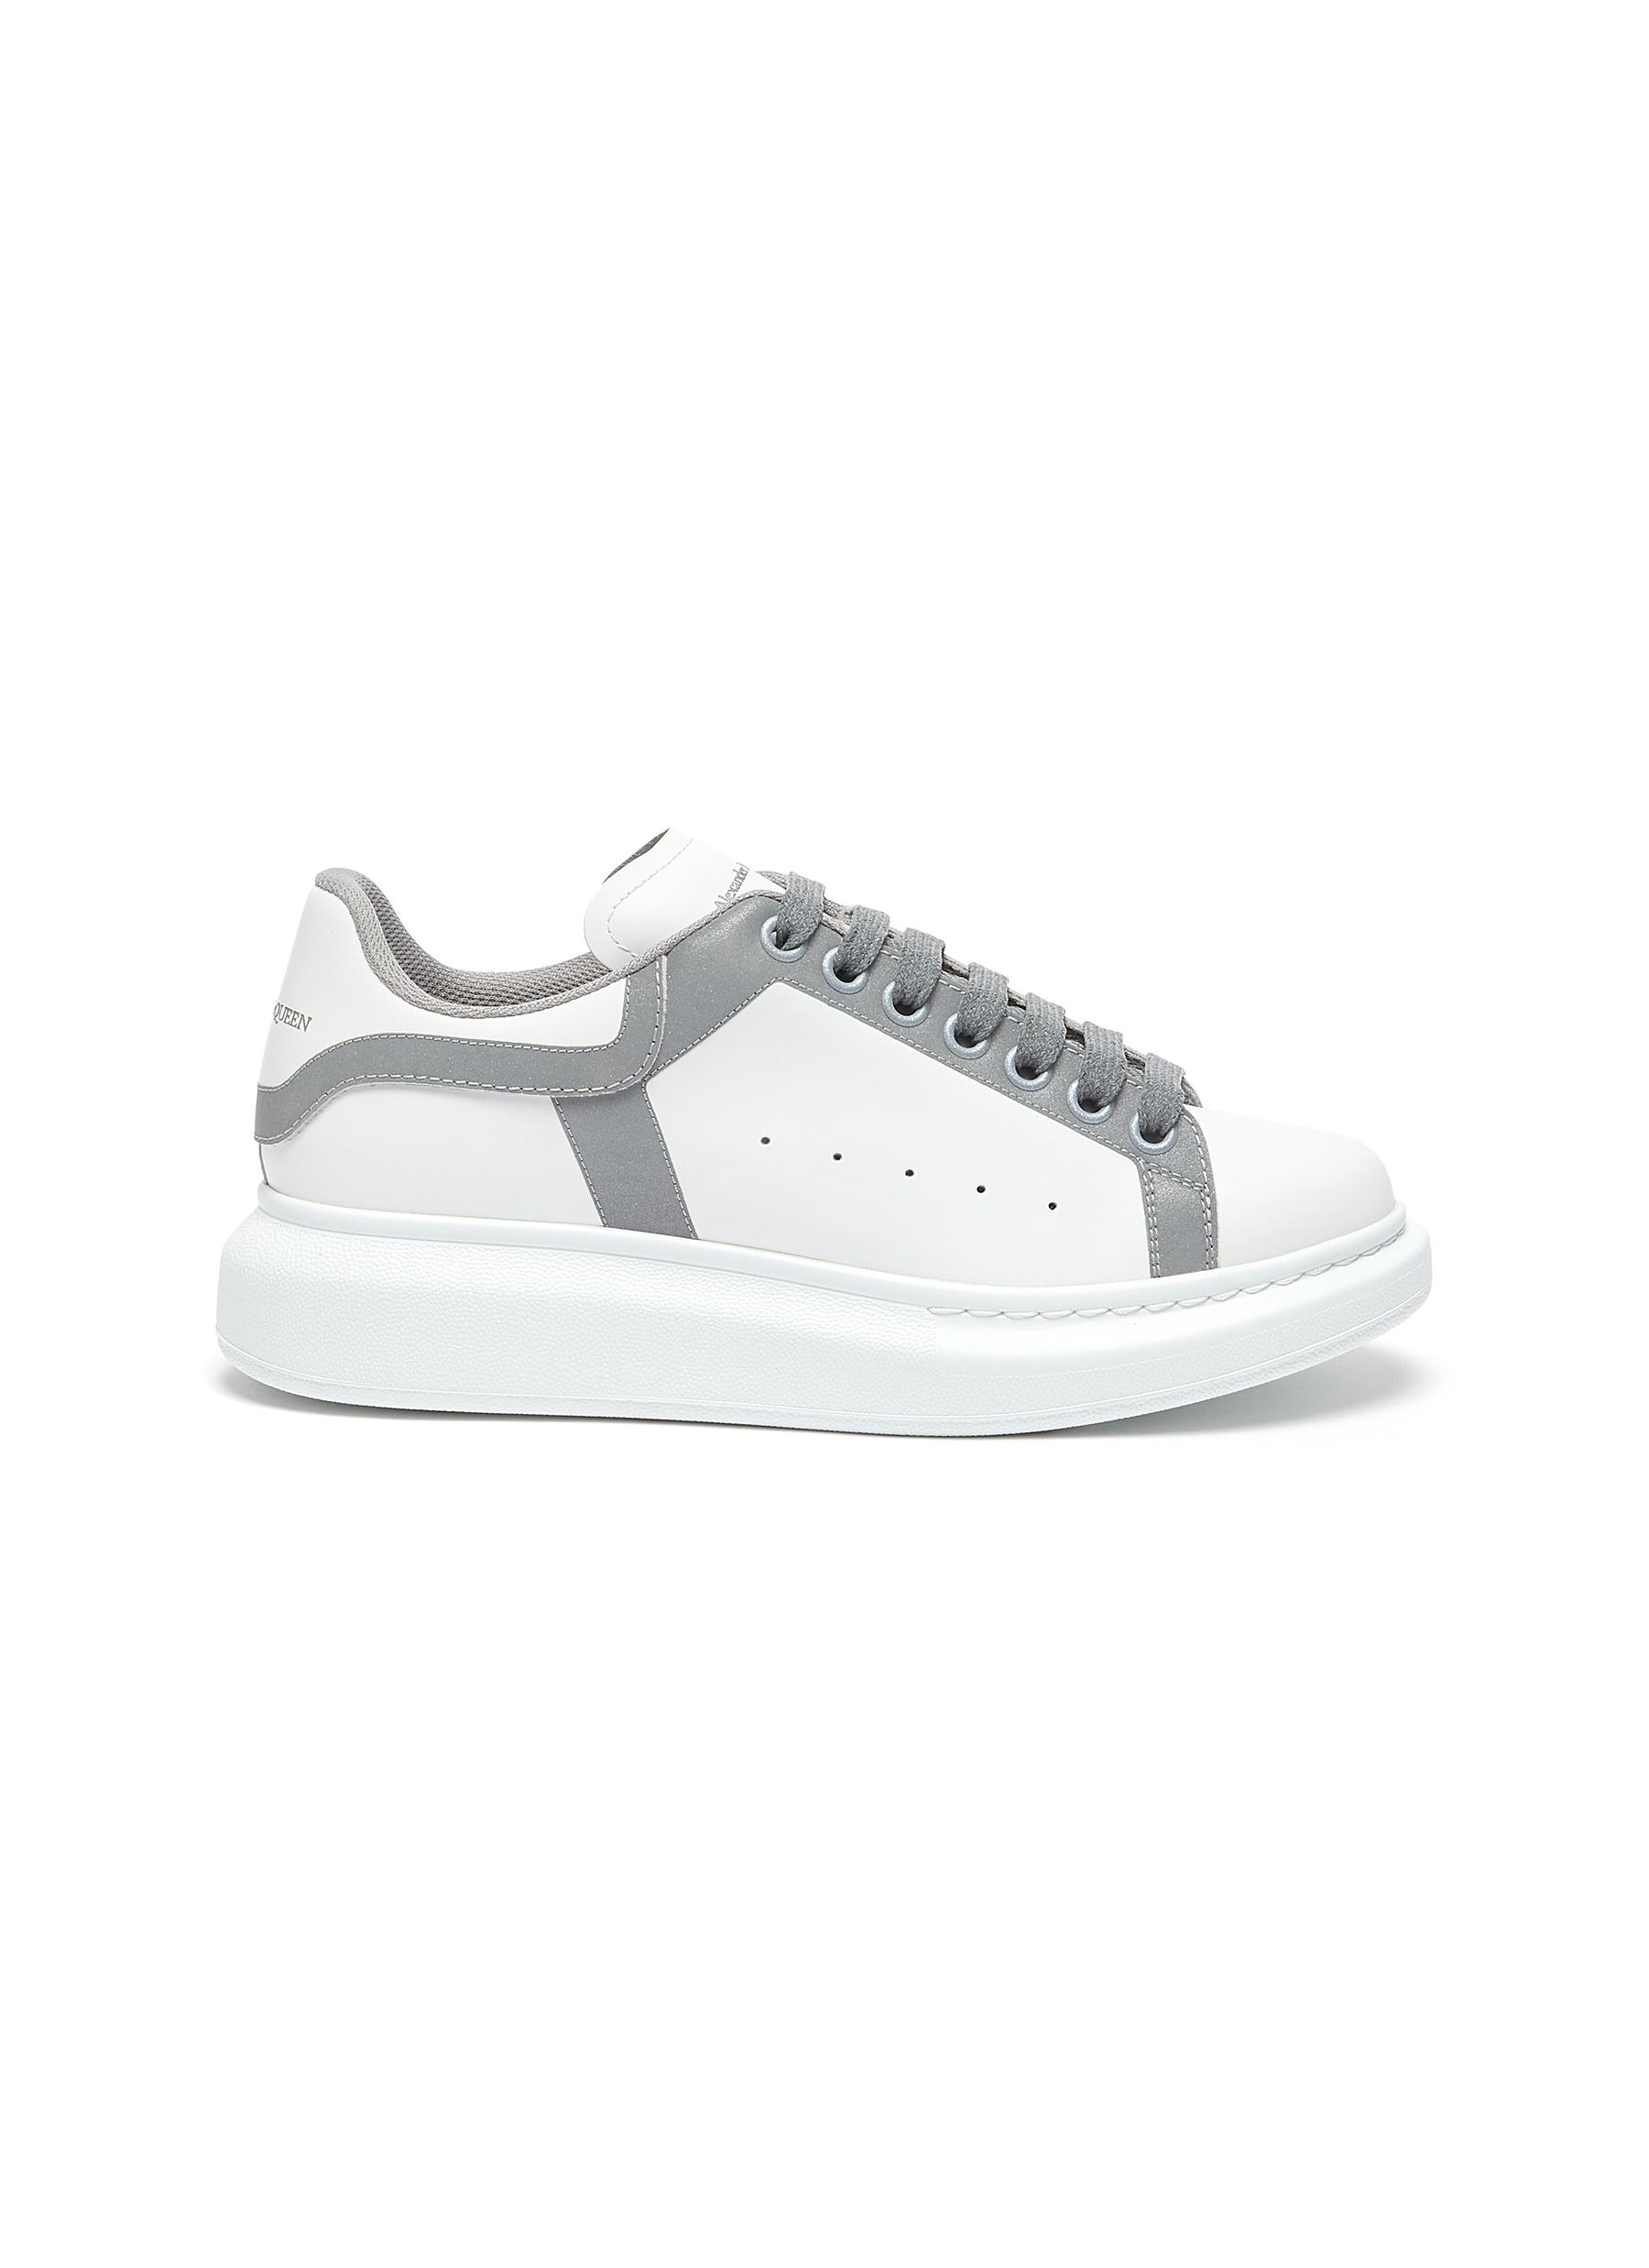 ALEXANDER MCQUEEN 'OVERSIZED SNEAKERS' IN LEATHER WITH CONTRASTING PIPPING